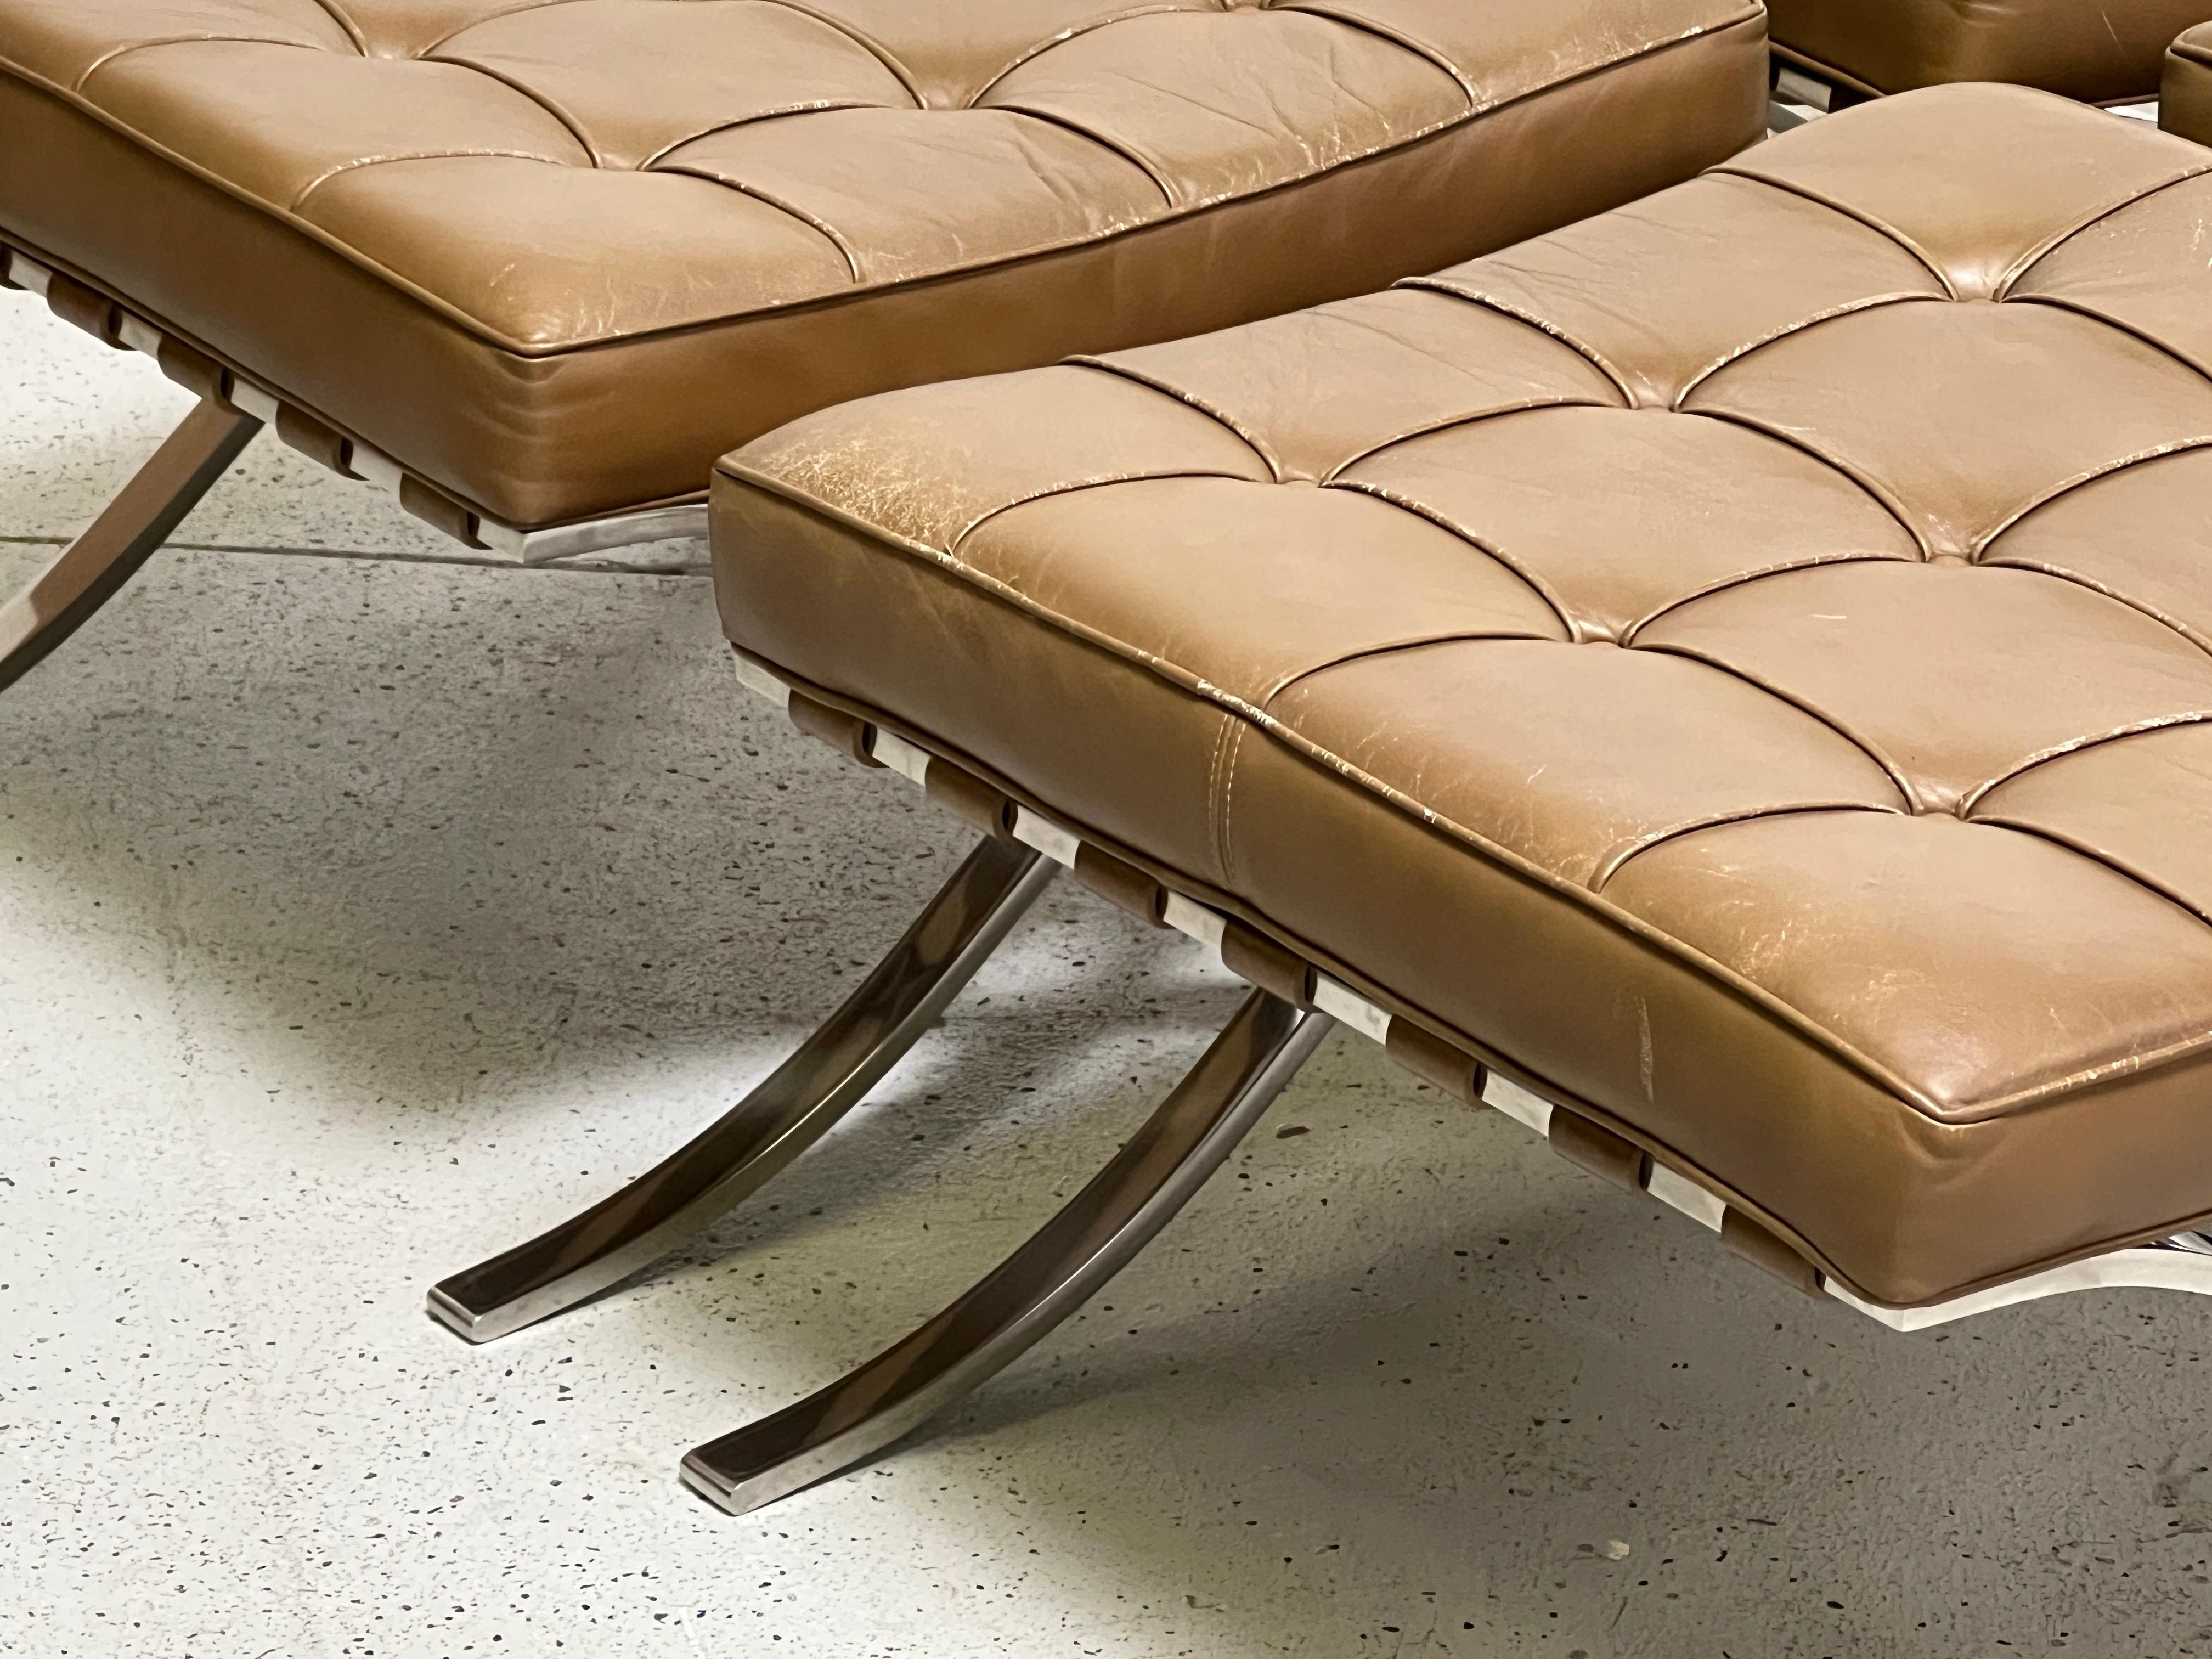 Barcelona stools in polished stainless steel and patinated brown leather. Designed by Mies van der Rohe for Knoll. Priced and sold individually.